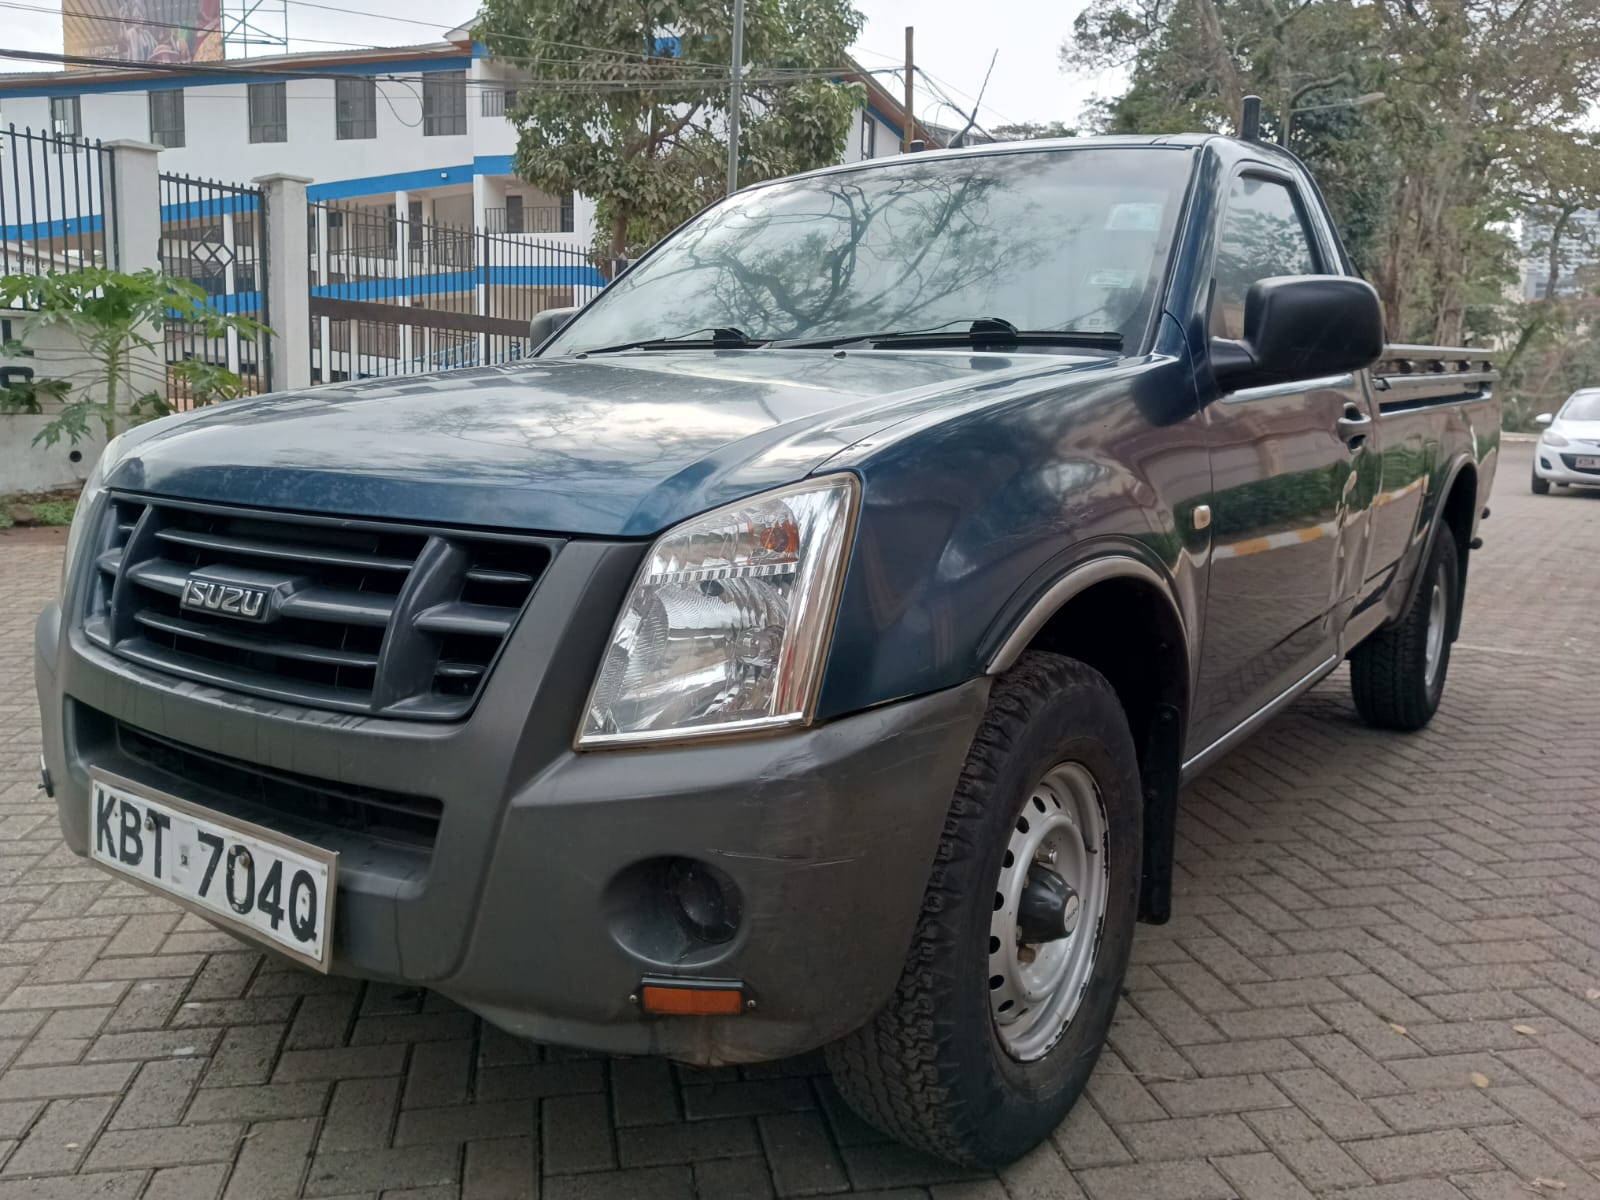 Isuzu D-max 2012 Local Assembly Pay 30% Deposit Trade in Ok Exclusive